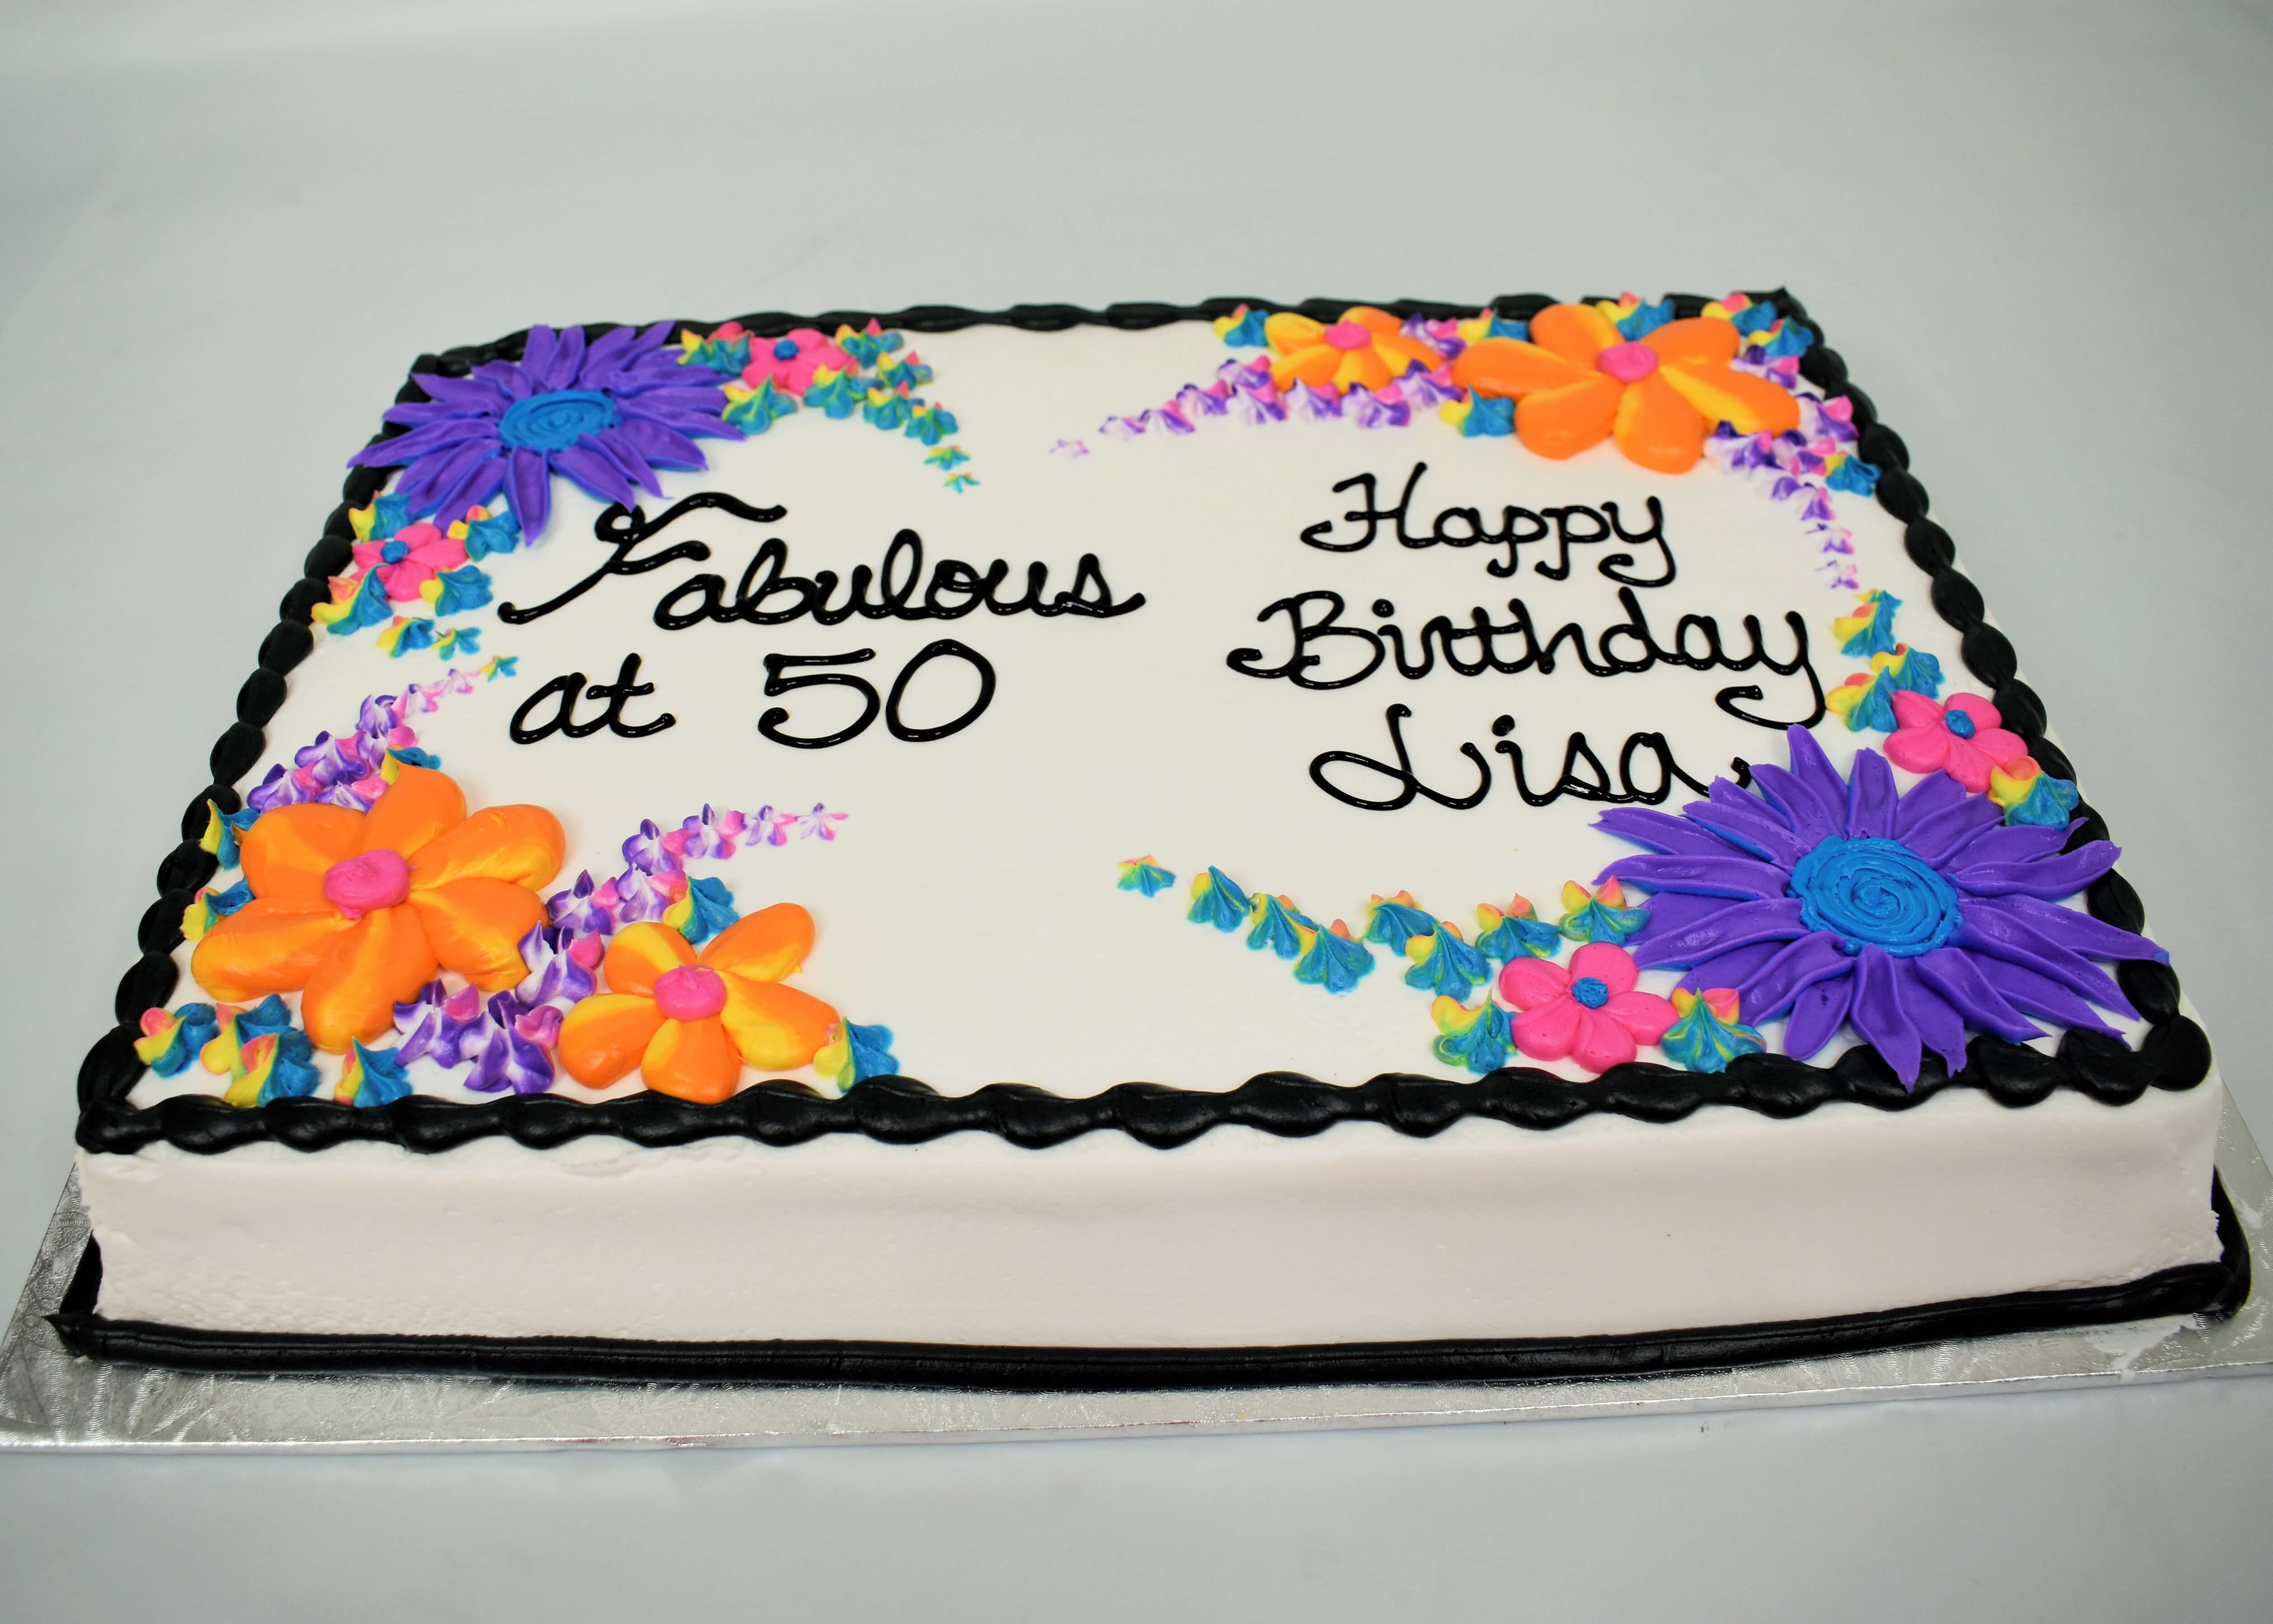 MaArthur's Bakery Custom Cake with Fabulous at 50, Assorted Flowers